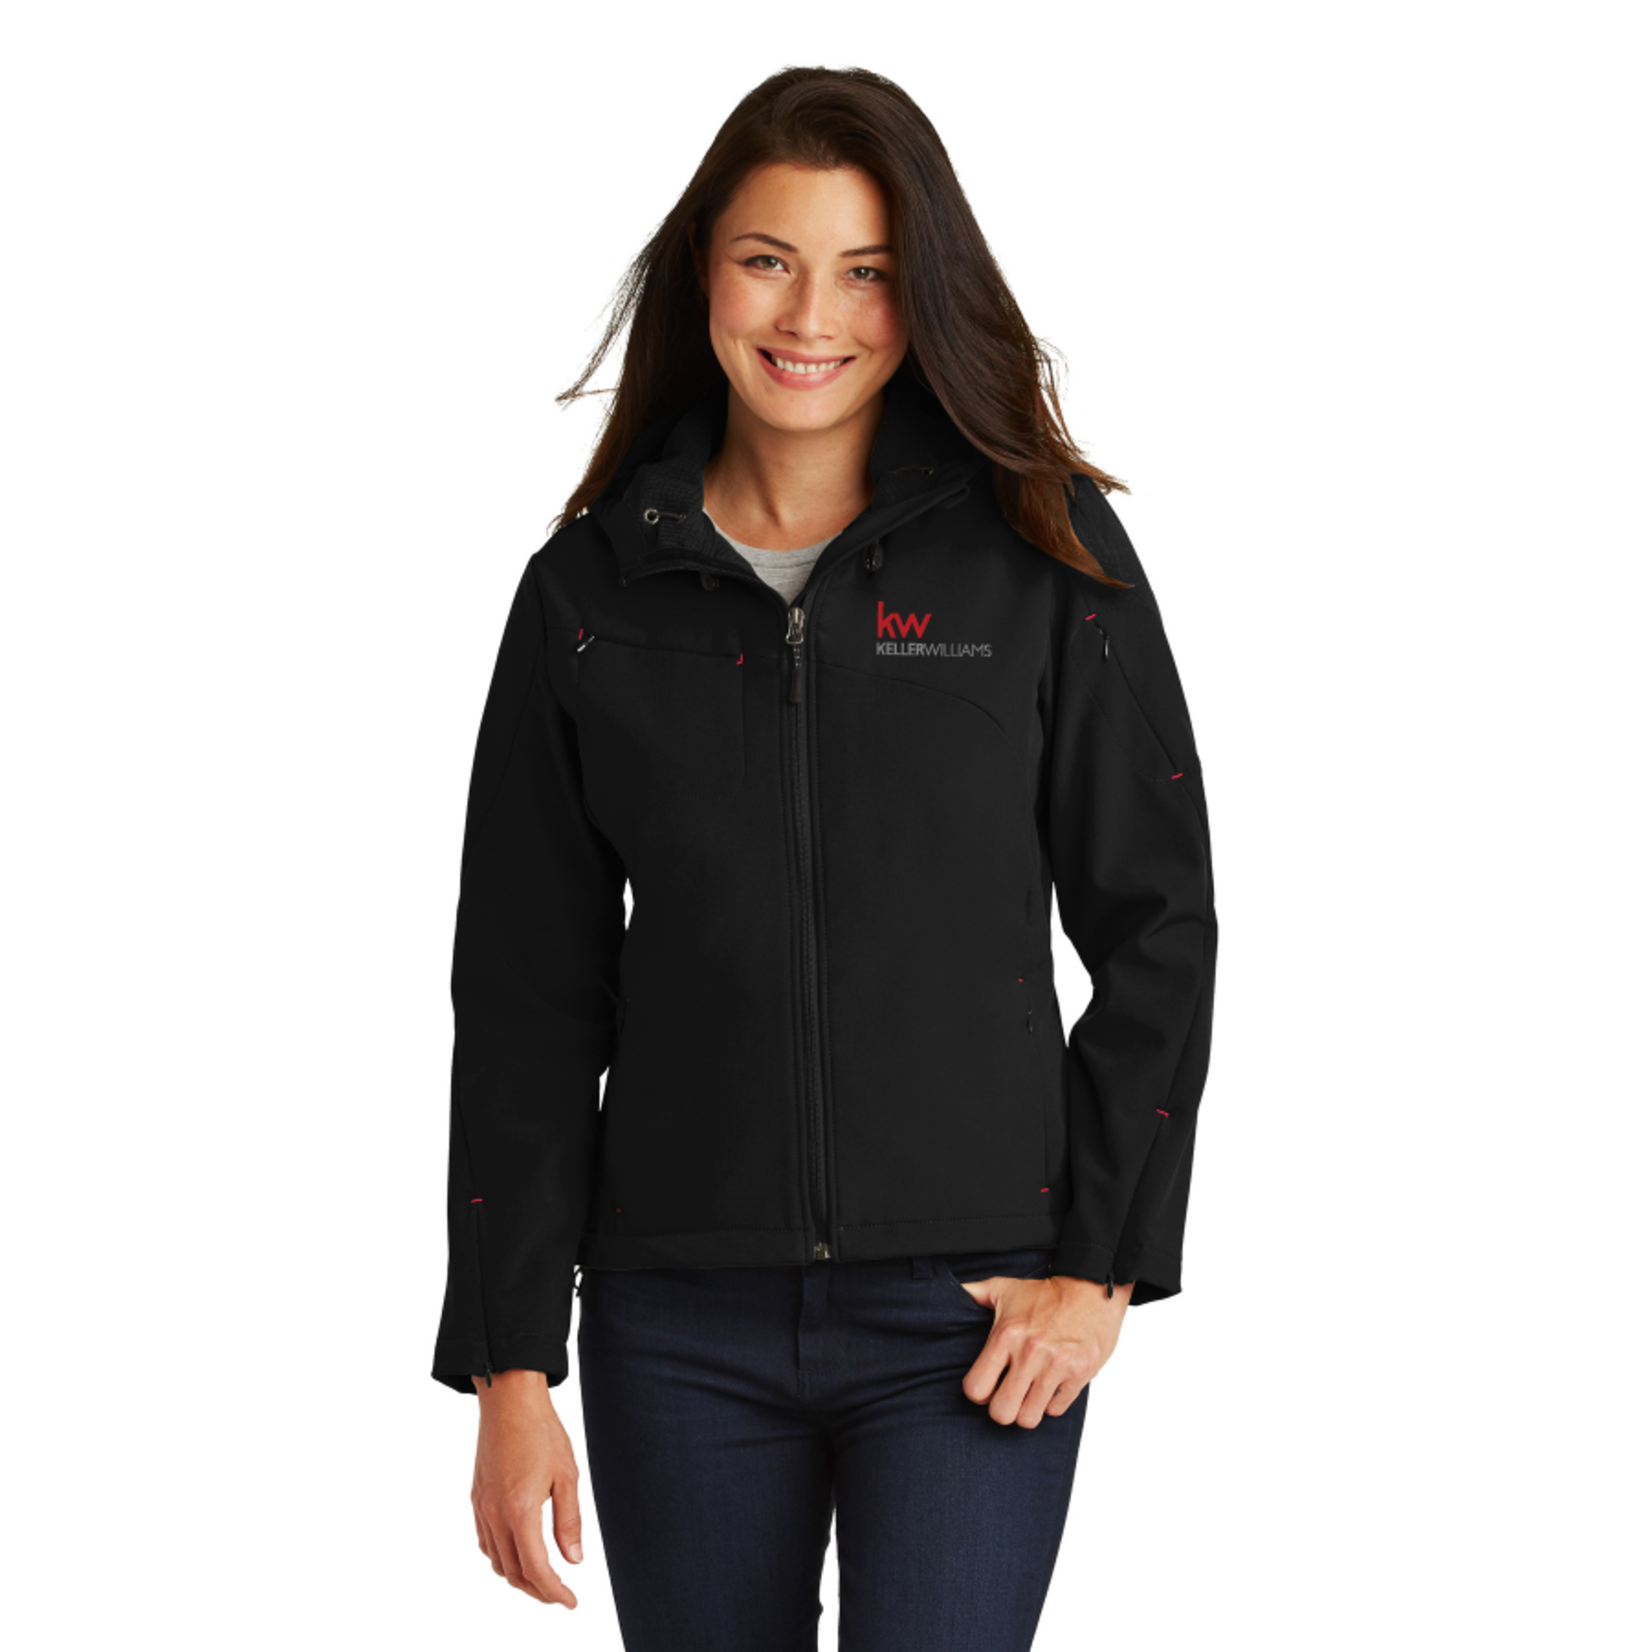 Port Authority KW L706 Ladies Textured Hooded Soft Shell Jacket